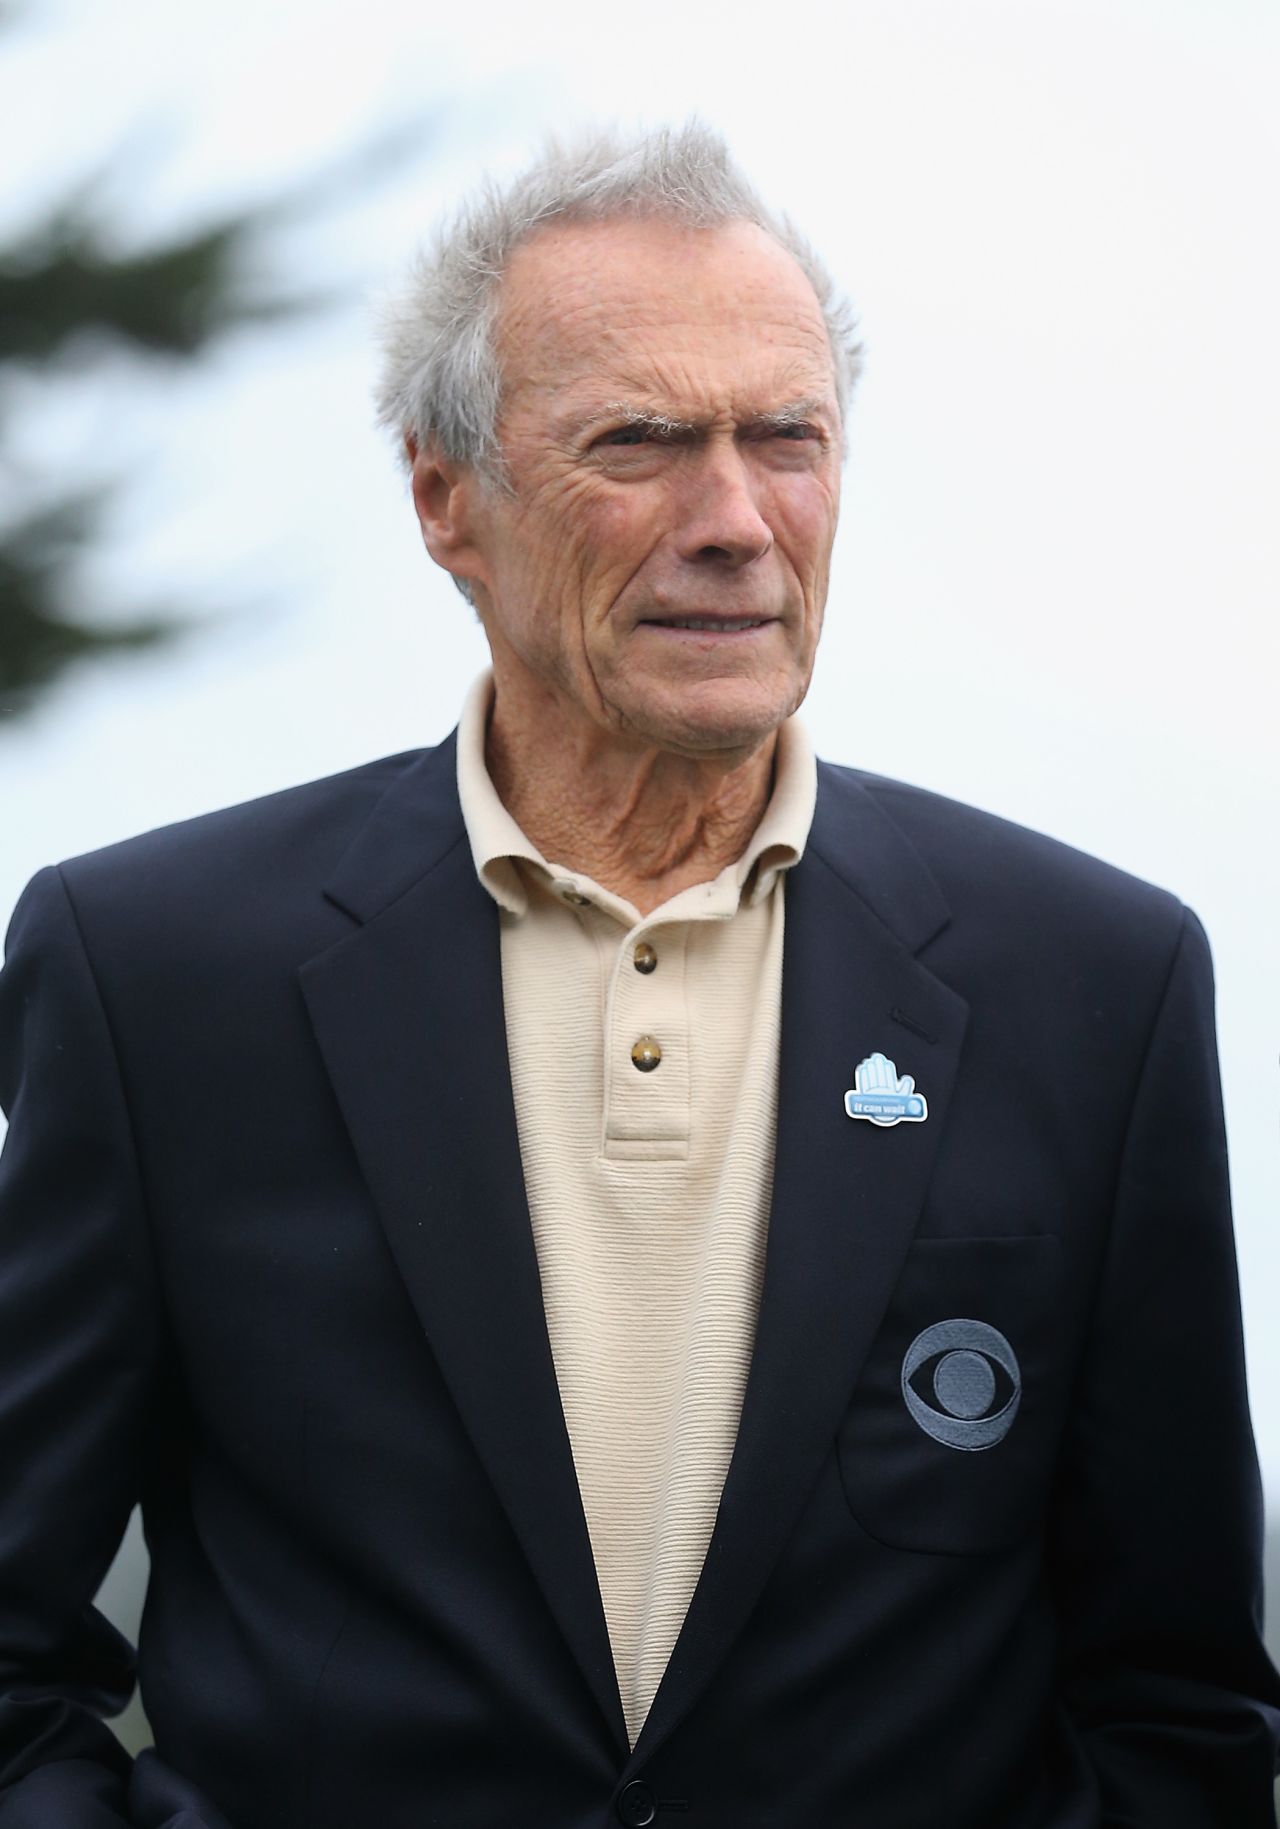 Clint Eastwood was also 66 when he had his seventh child, Morgan, with his second wife Dina Ruiz. Morgan Eastwood is now 18.